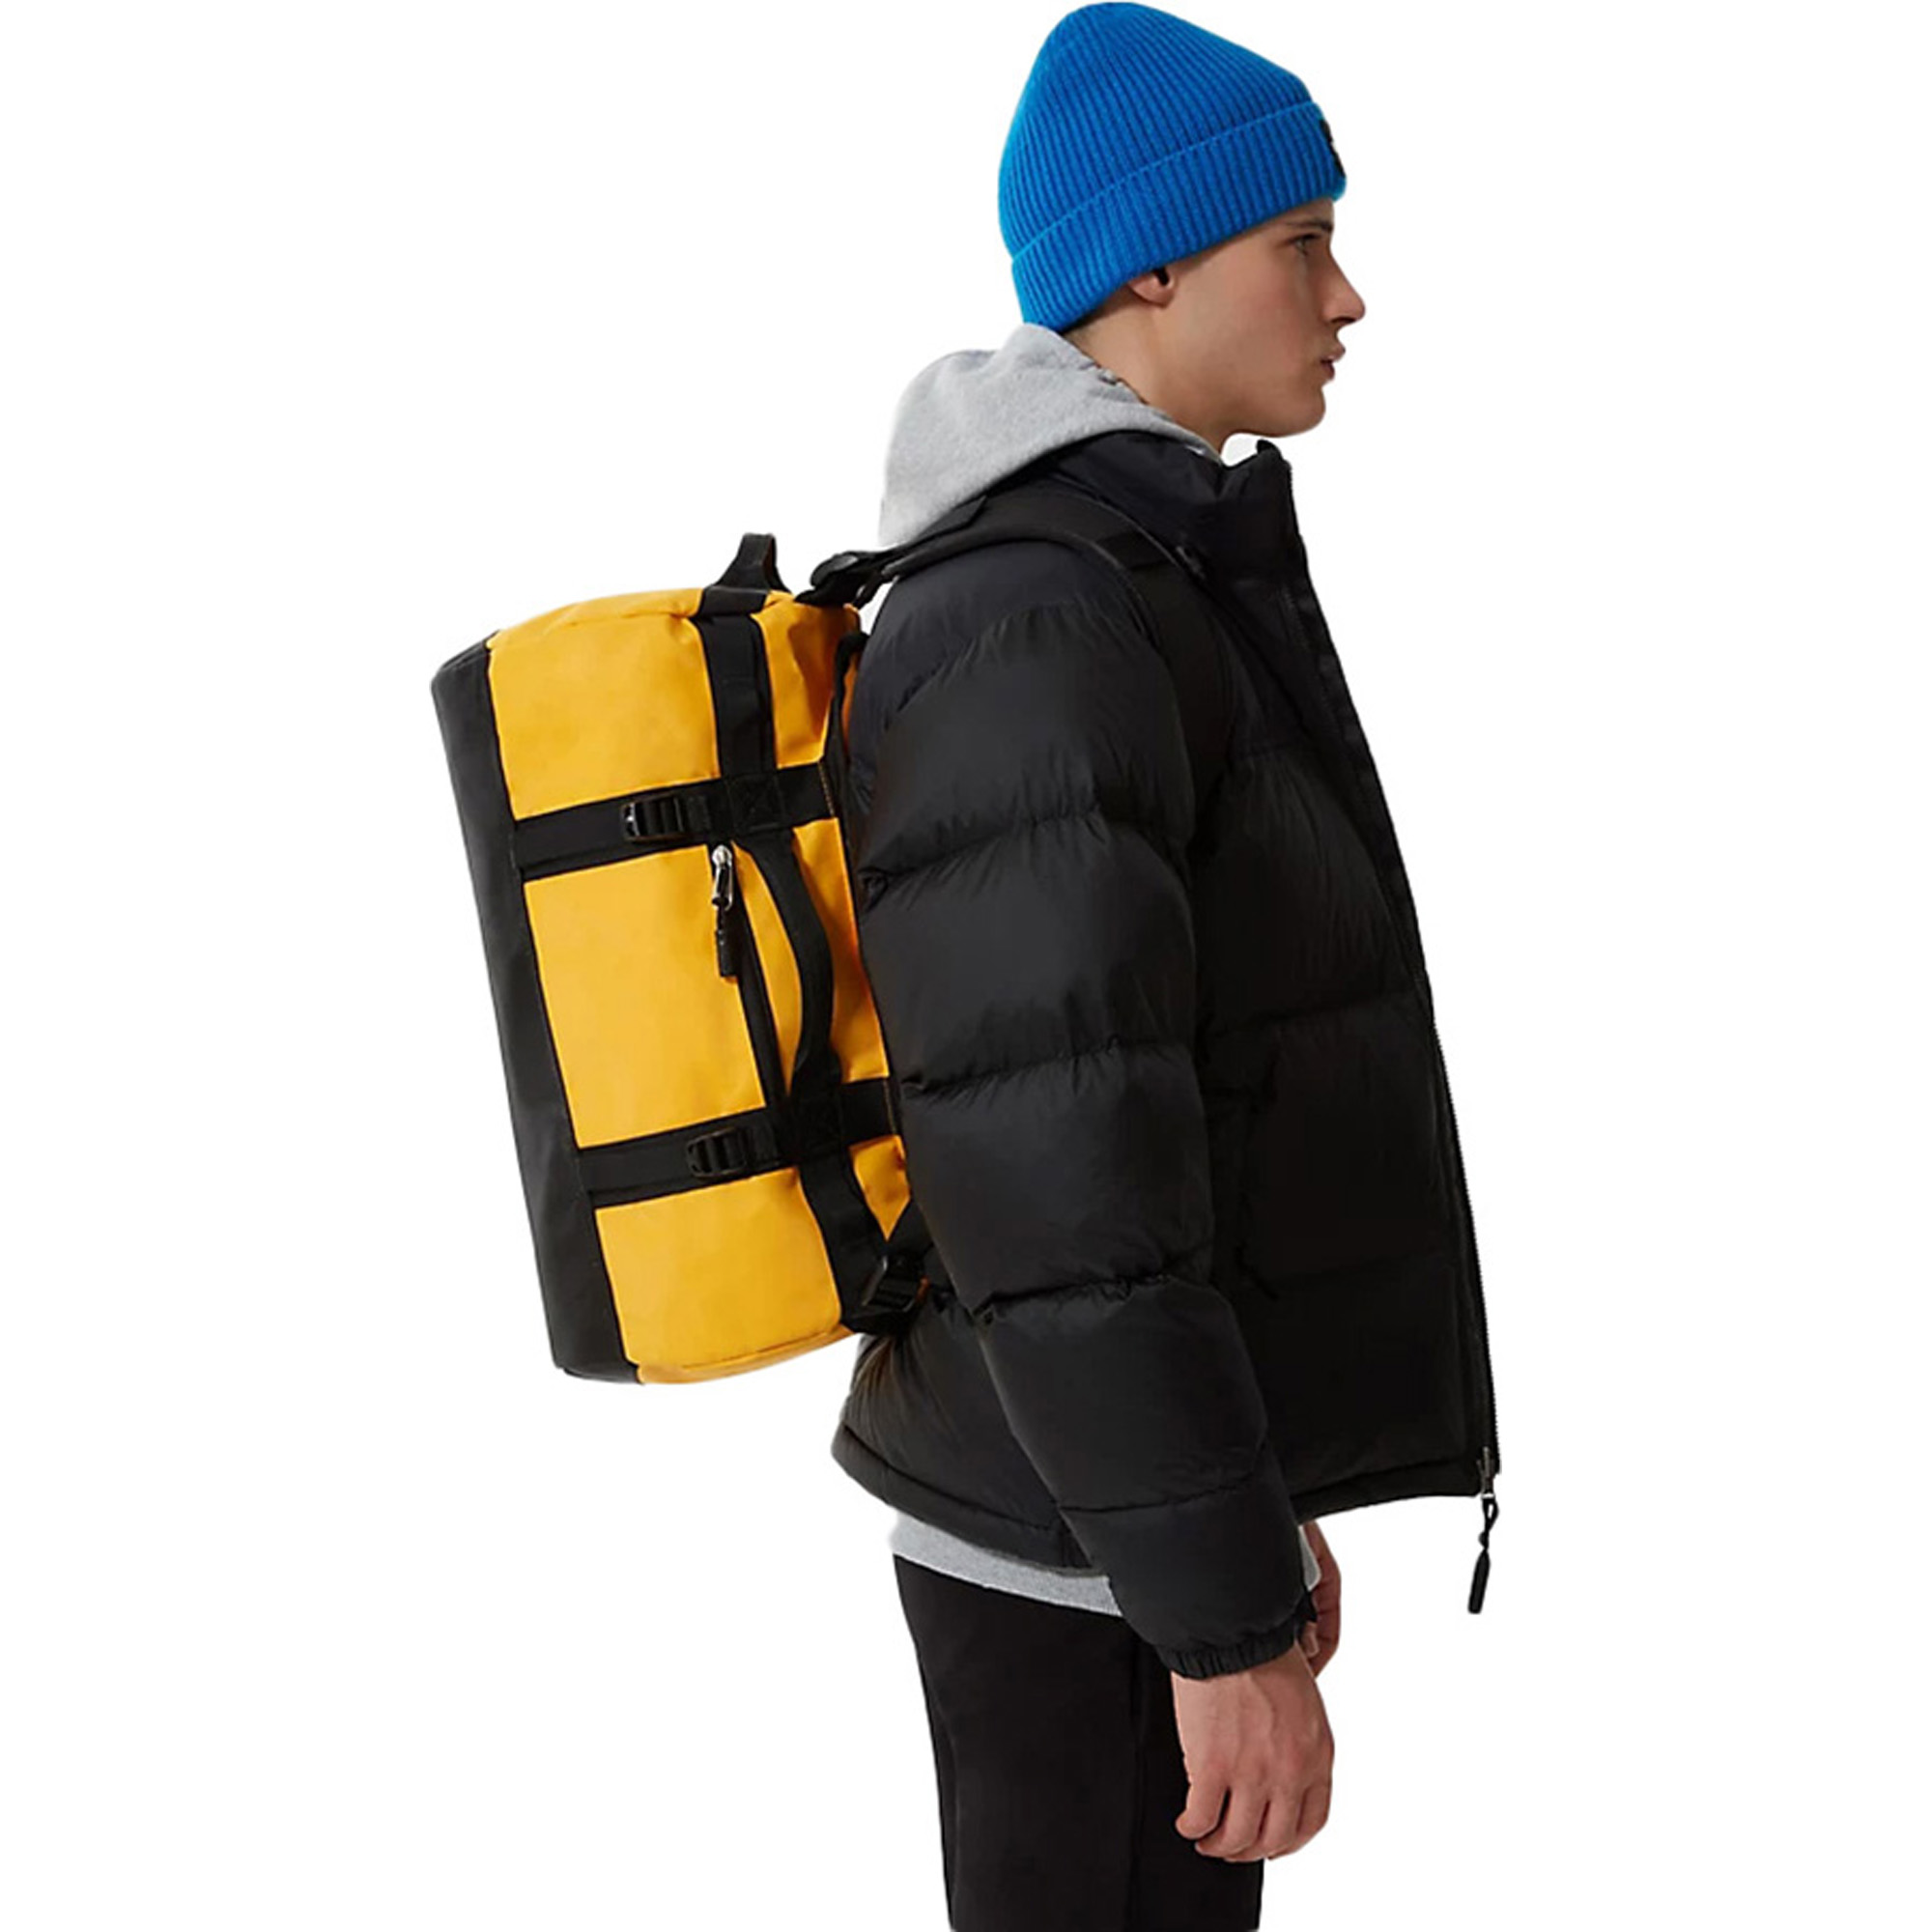 The North Face Base Camp XS, 31 Litres Duffel Bag/Backpack